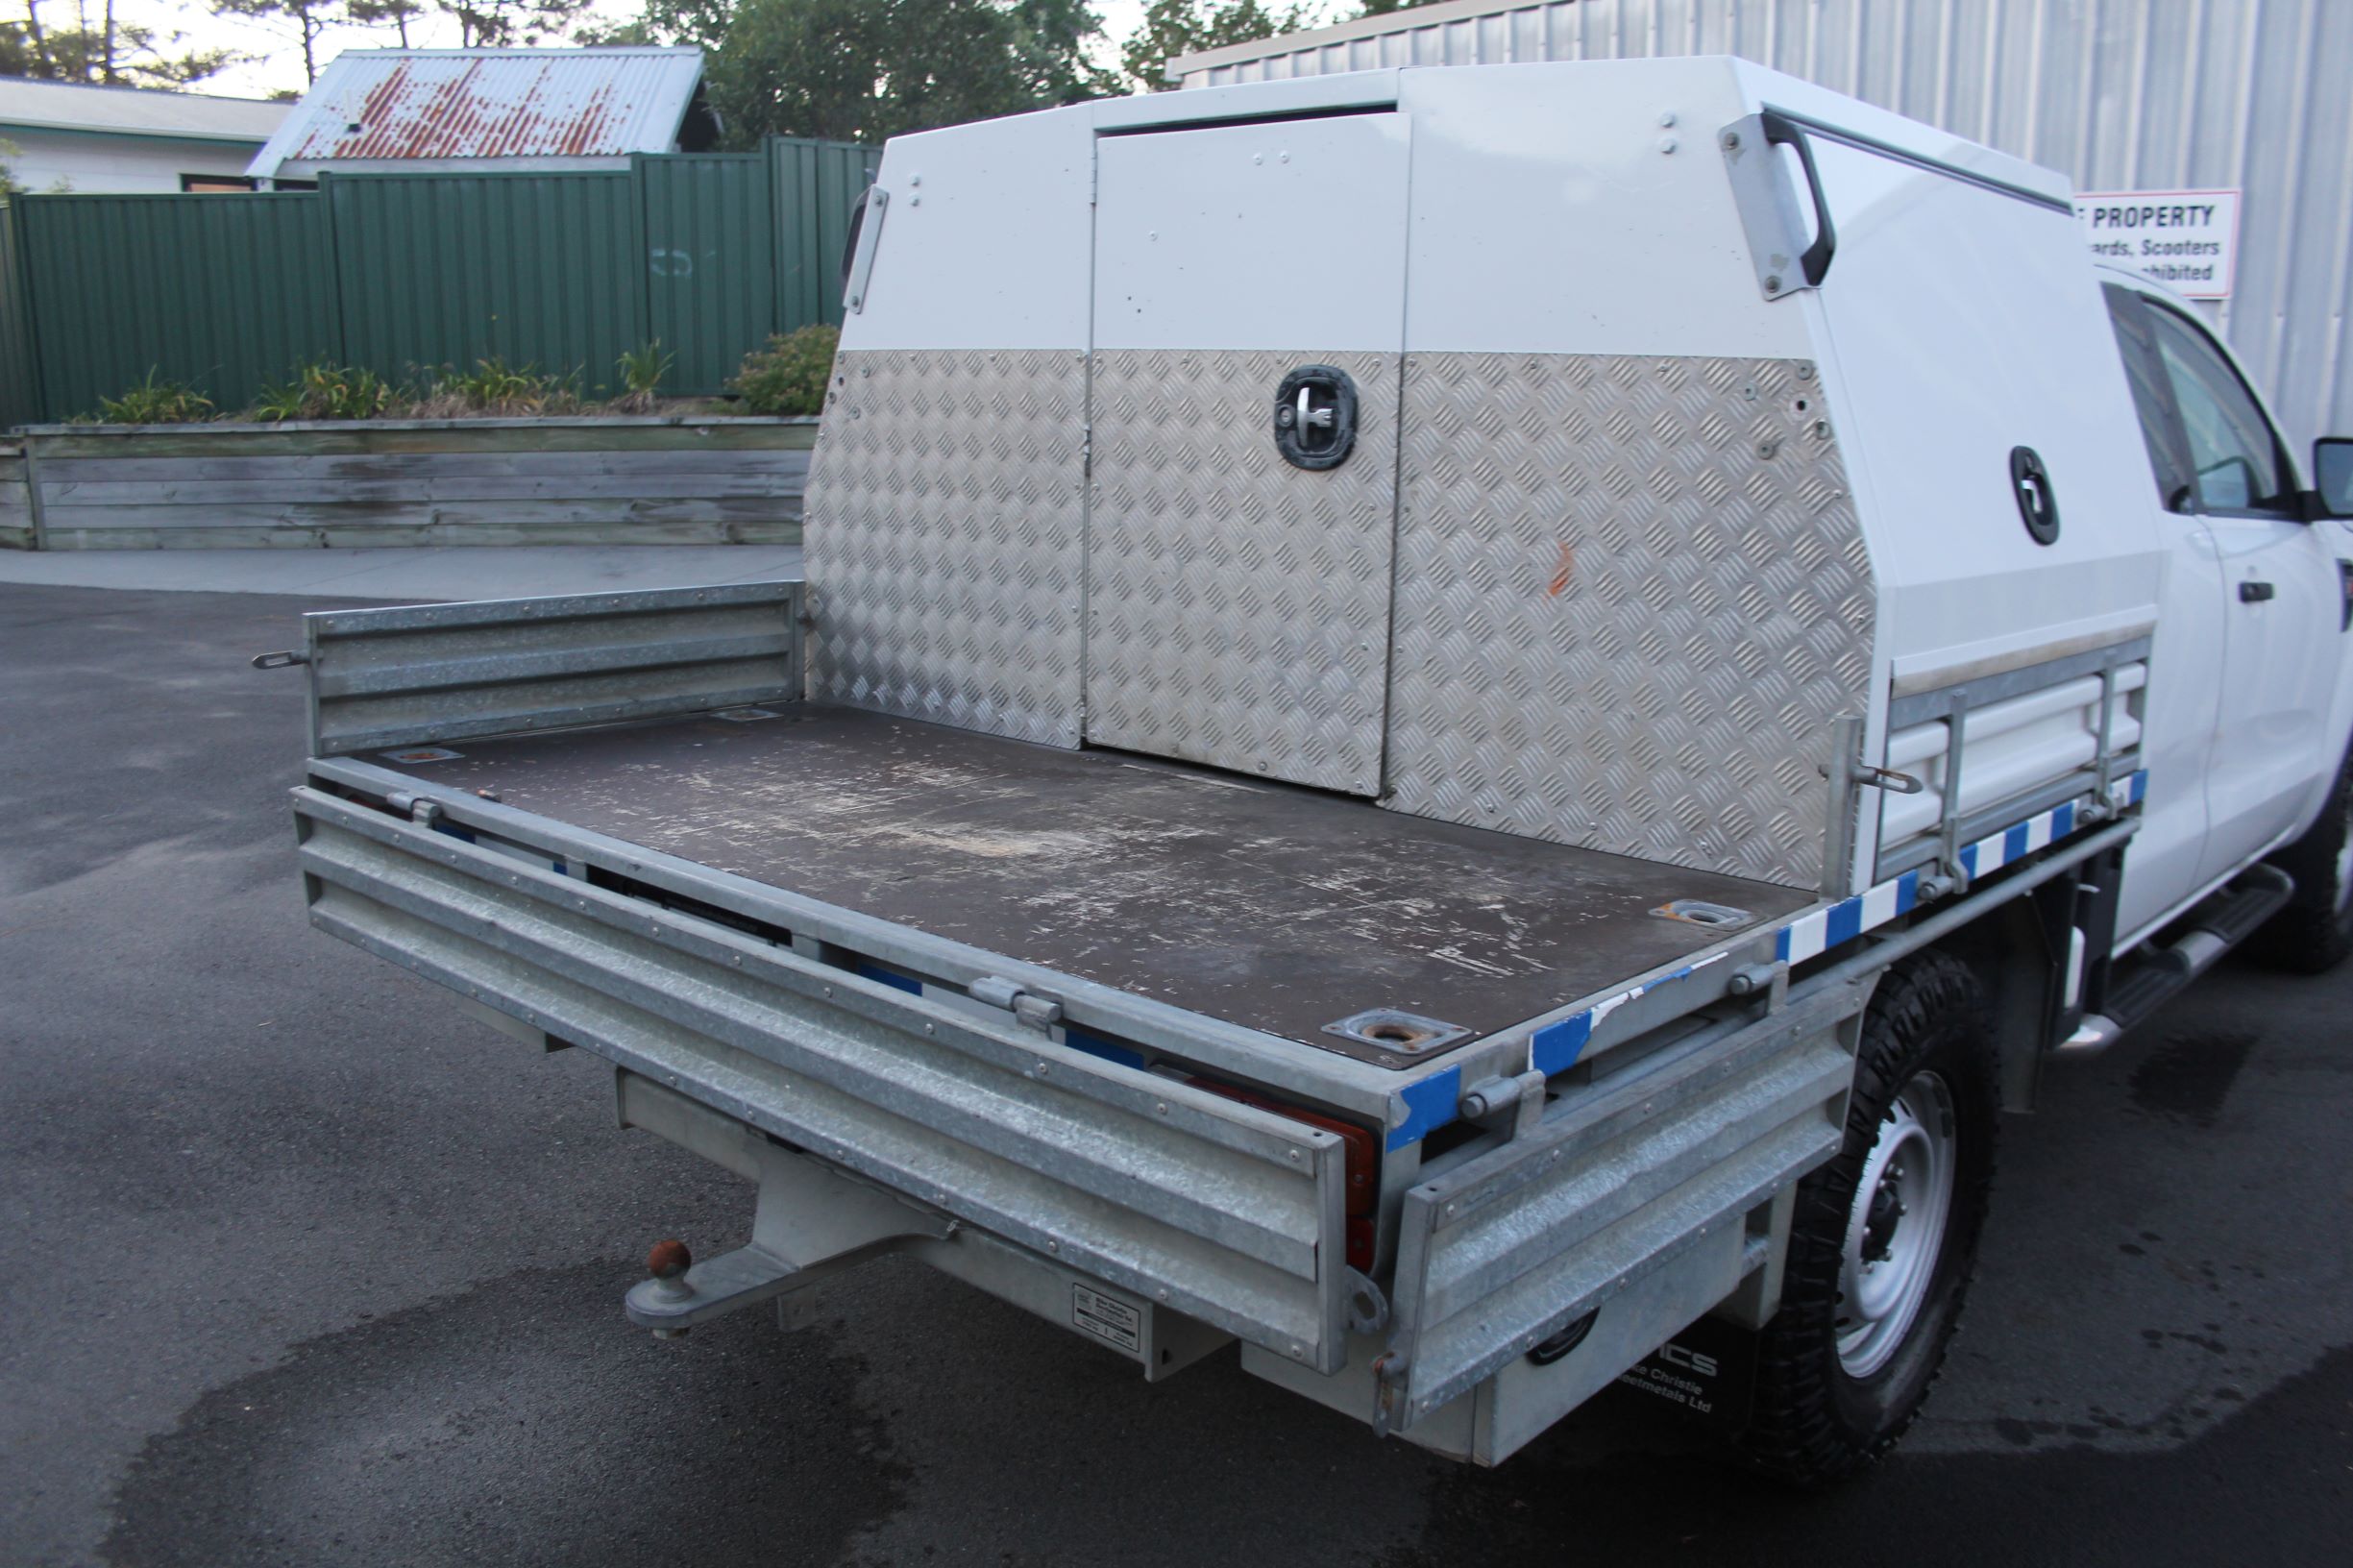 Ford Ranger 4WD FLATDECK TOOLBOXES 2015 for sale in Auckland